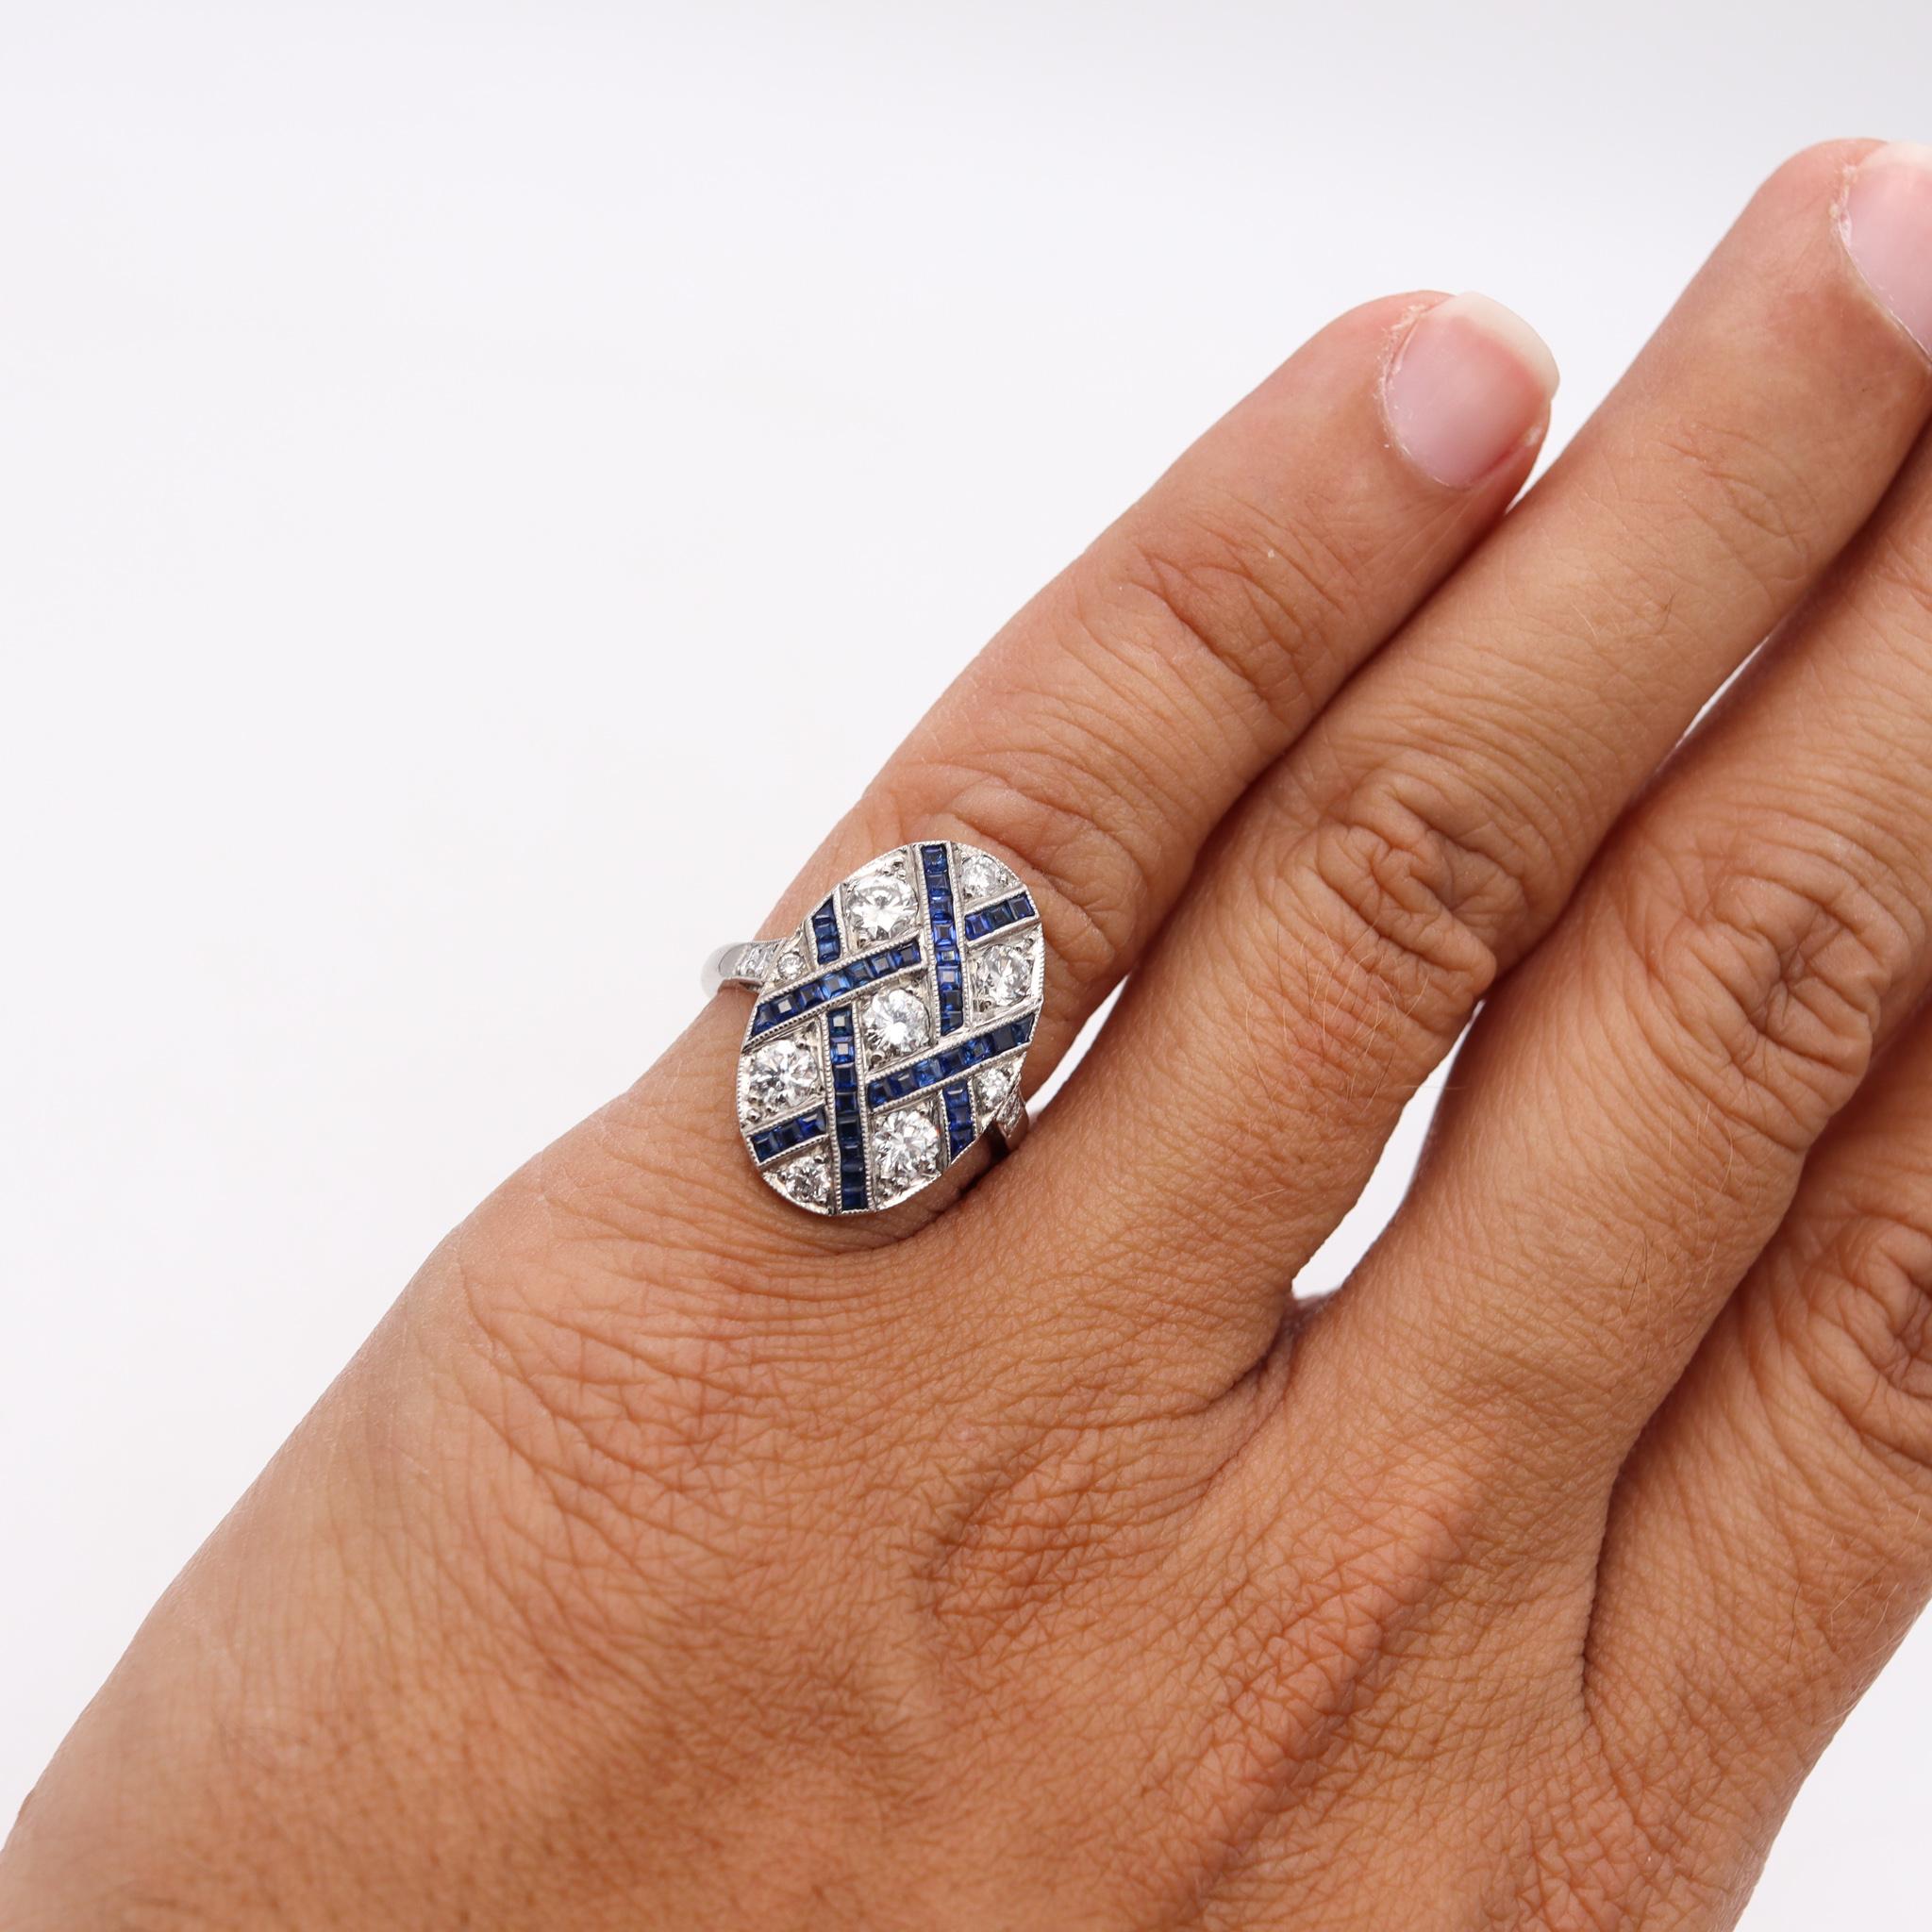 Women's or Men's Art Deco 1930 Geometric Ring in Platinum with 2.34 Cts in Diamonds & Sapphires